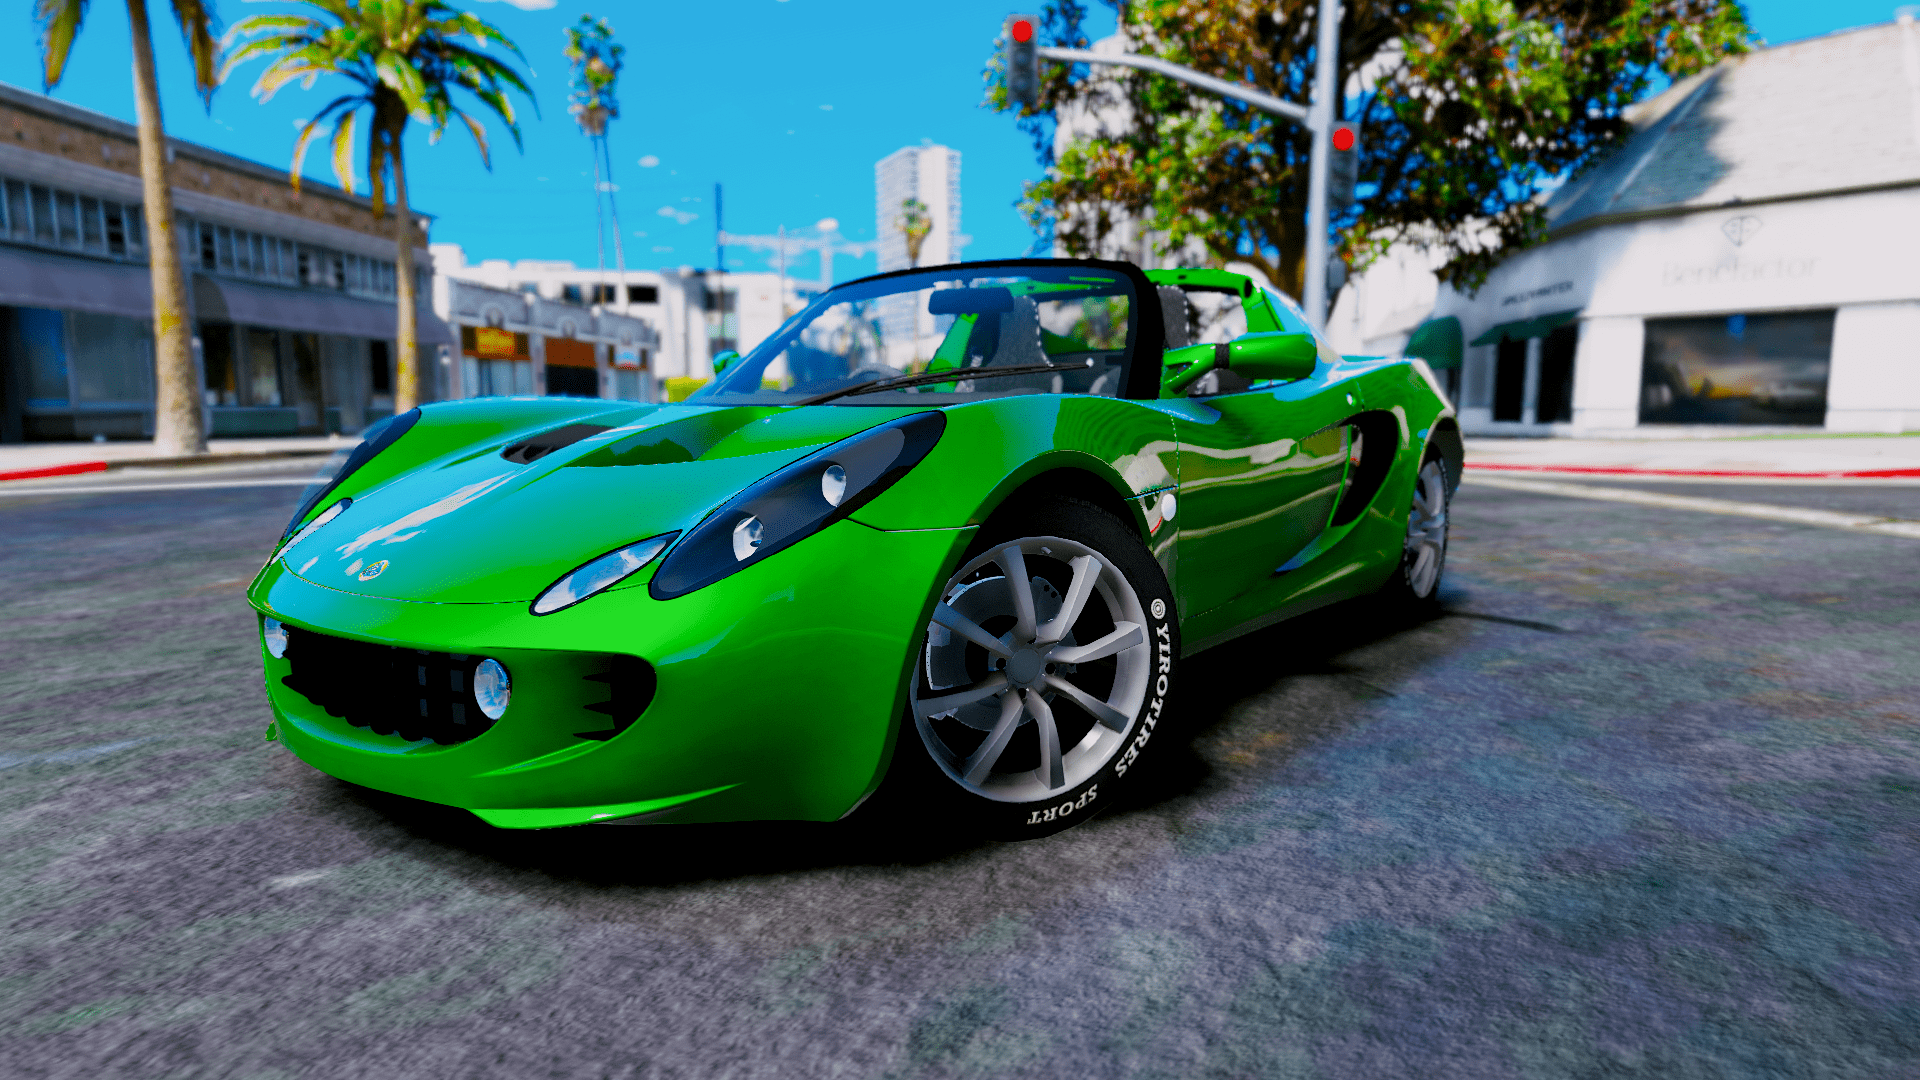 Lotus Elise 111S 2005 [Add-On / Replace | OIV | Tuning | Template | Wiper | Dirtmap | Animated Engine | HQ]